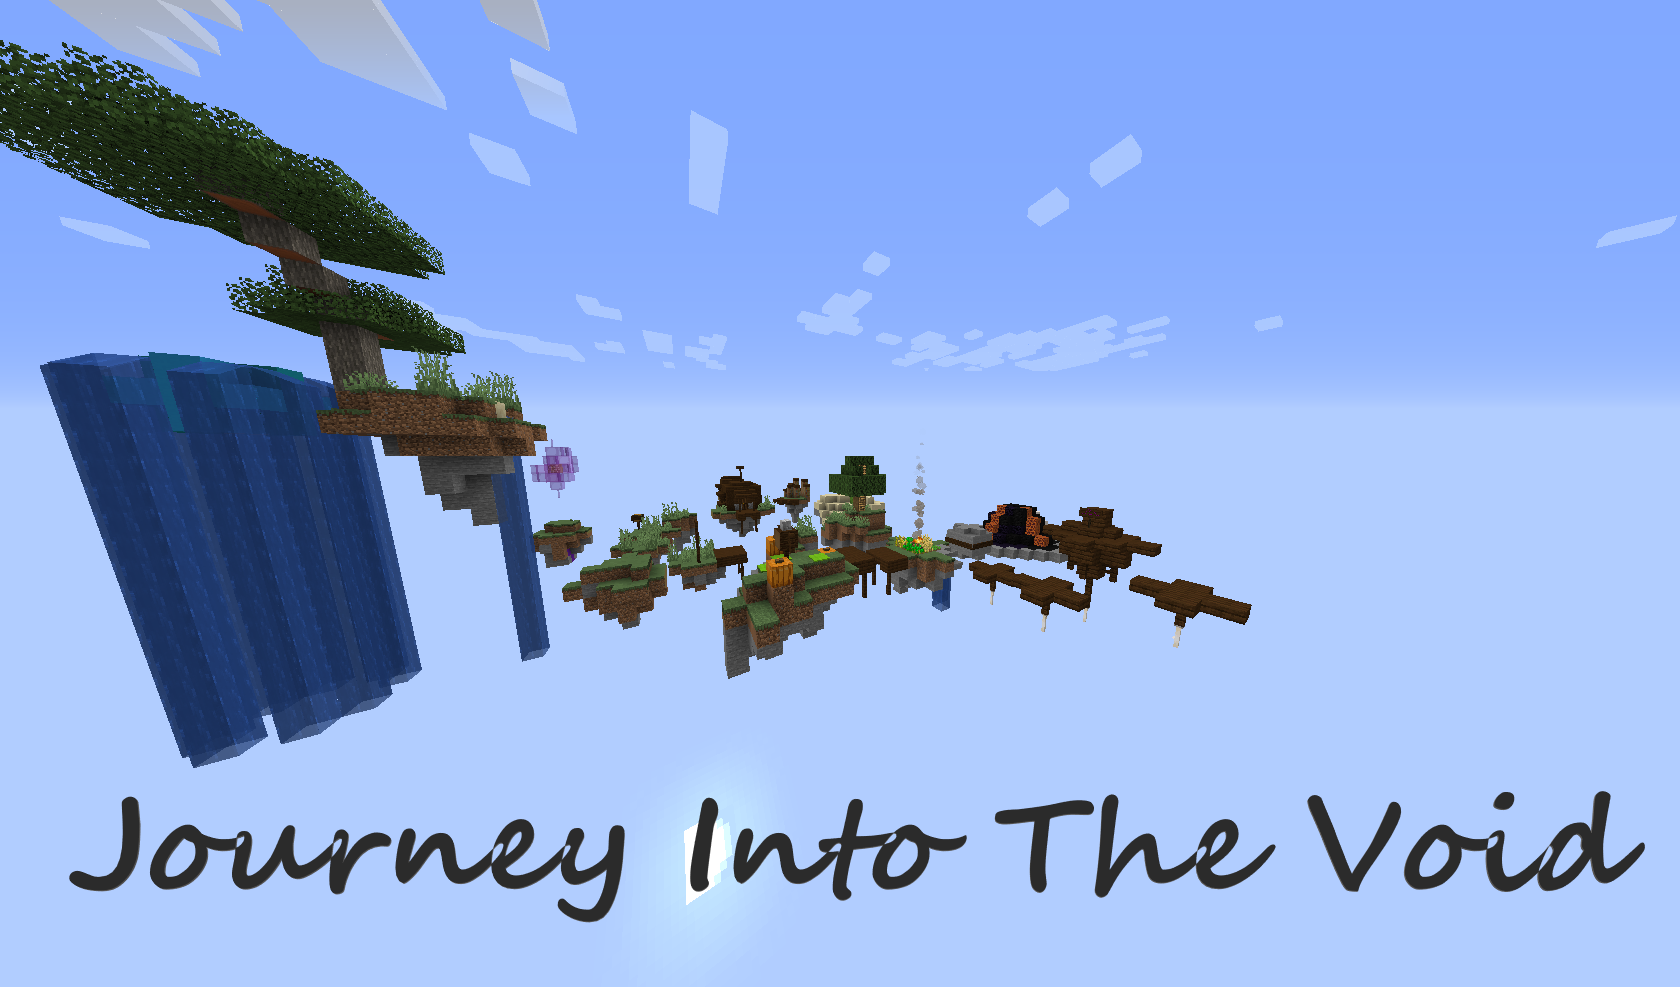 Download Journey Into The Void for Minecraft 1.14.4